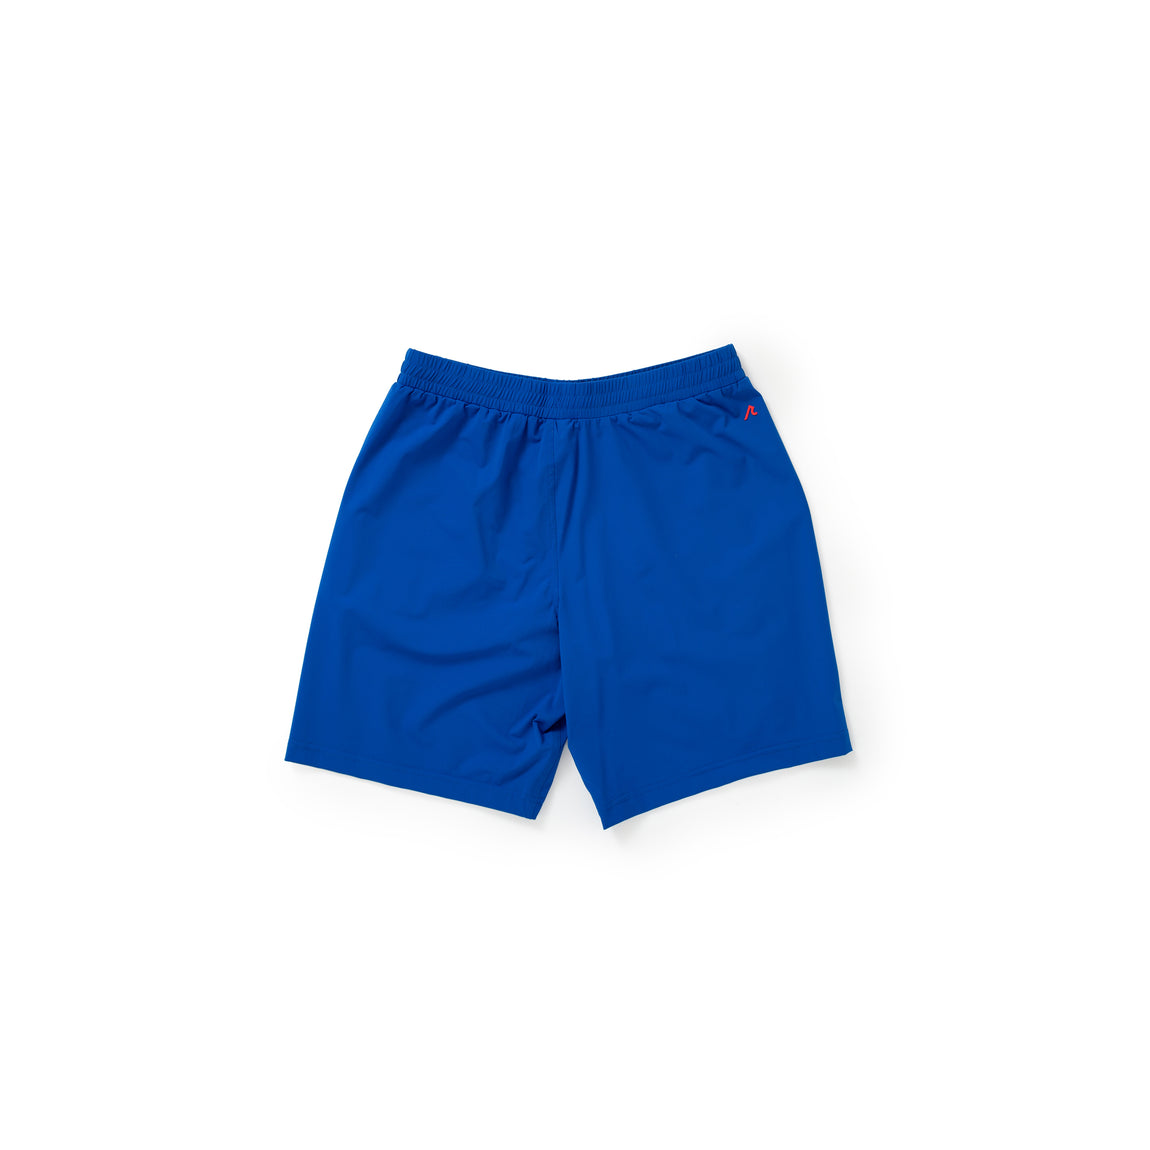 Centre X REDVANLY Parnell Tennis Short (Olympic Blue) - Centre X REDVANLY Parnell Tennis Short (Olympic Blue) - 